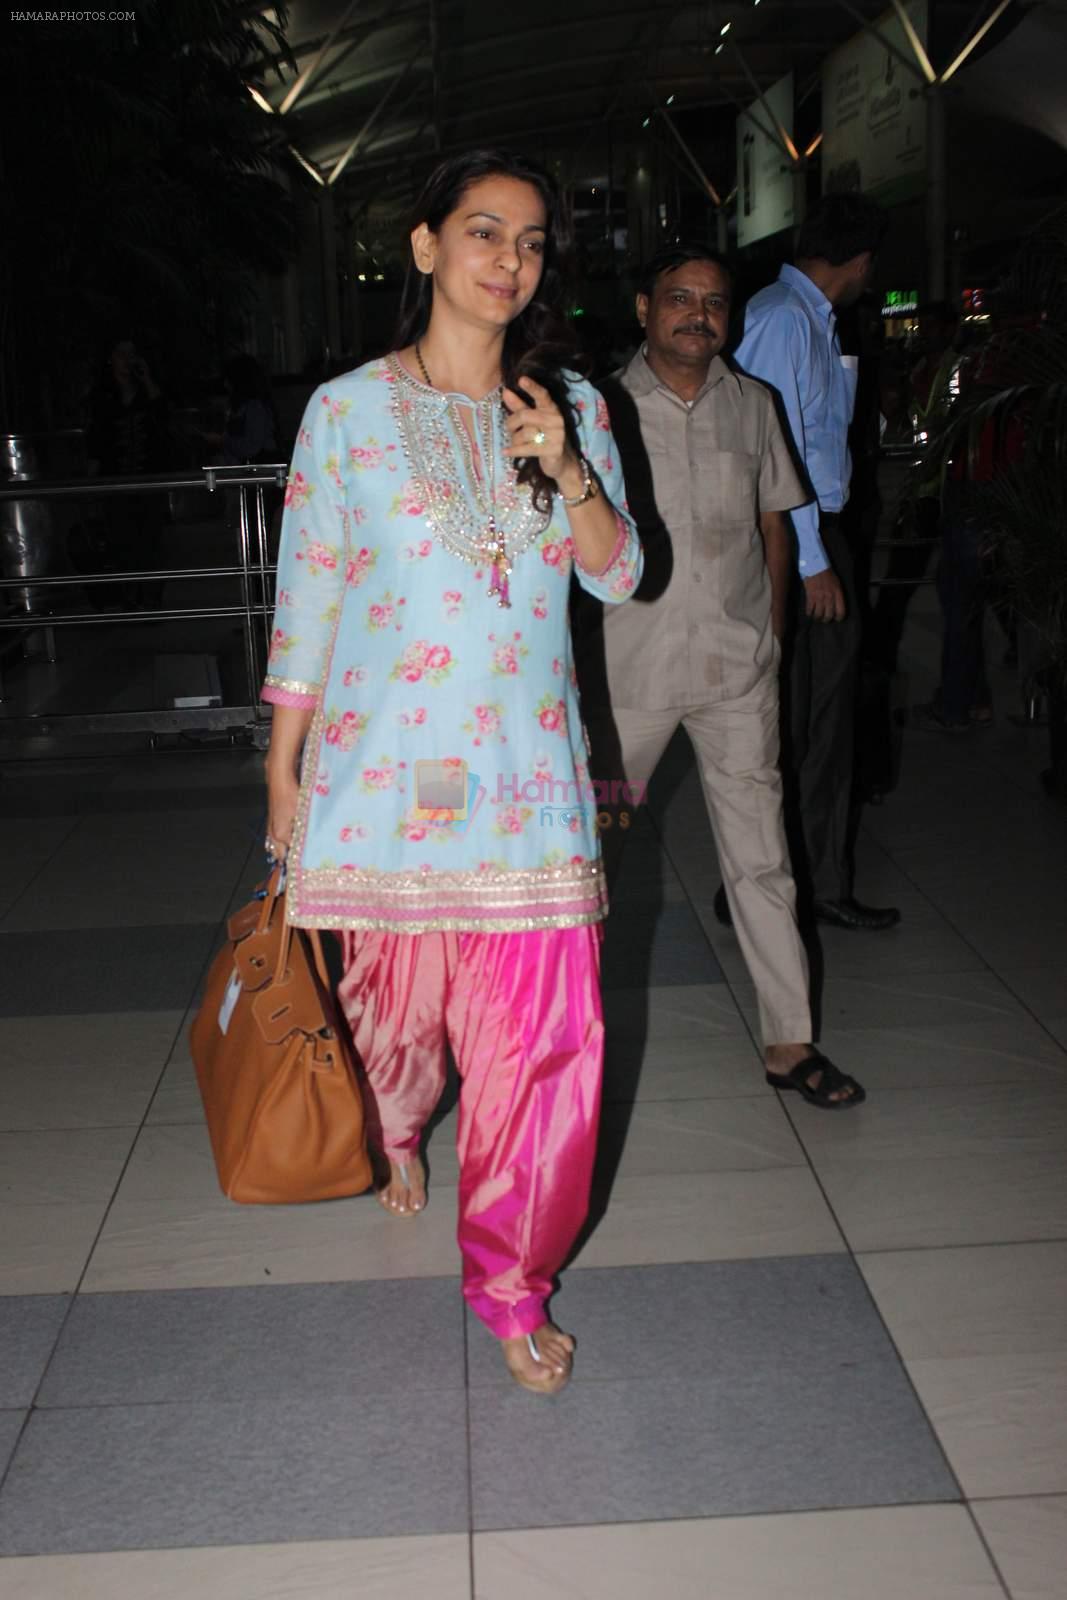 Juhi Chawla snapped at airport on 14th Dec 2015